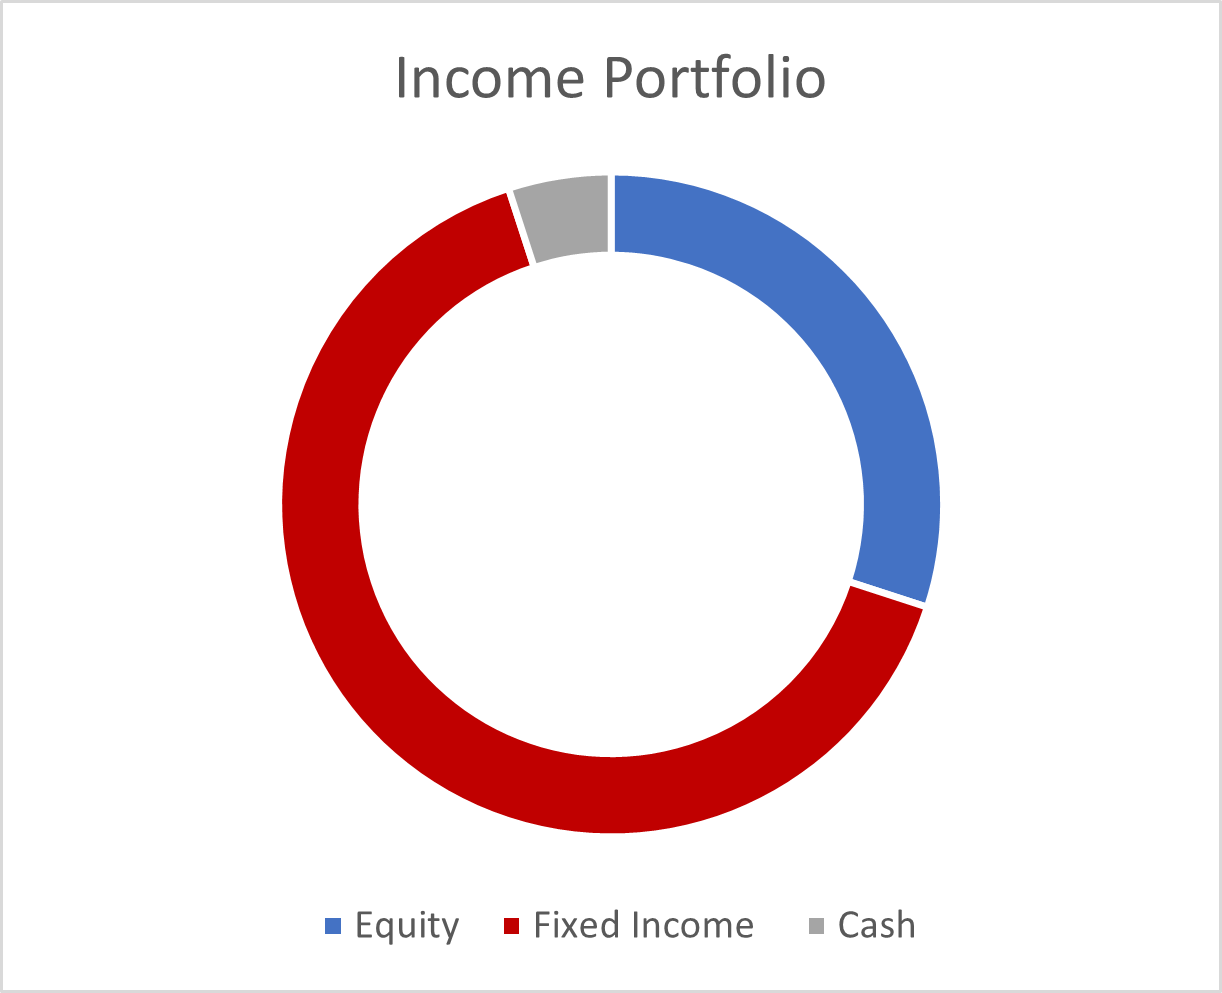 Graph of an Income Portfolio with Equity (30-35%), Fixed Income (60-65%) and Cash (5%).